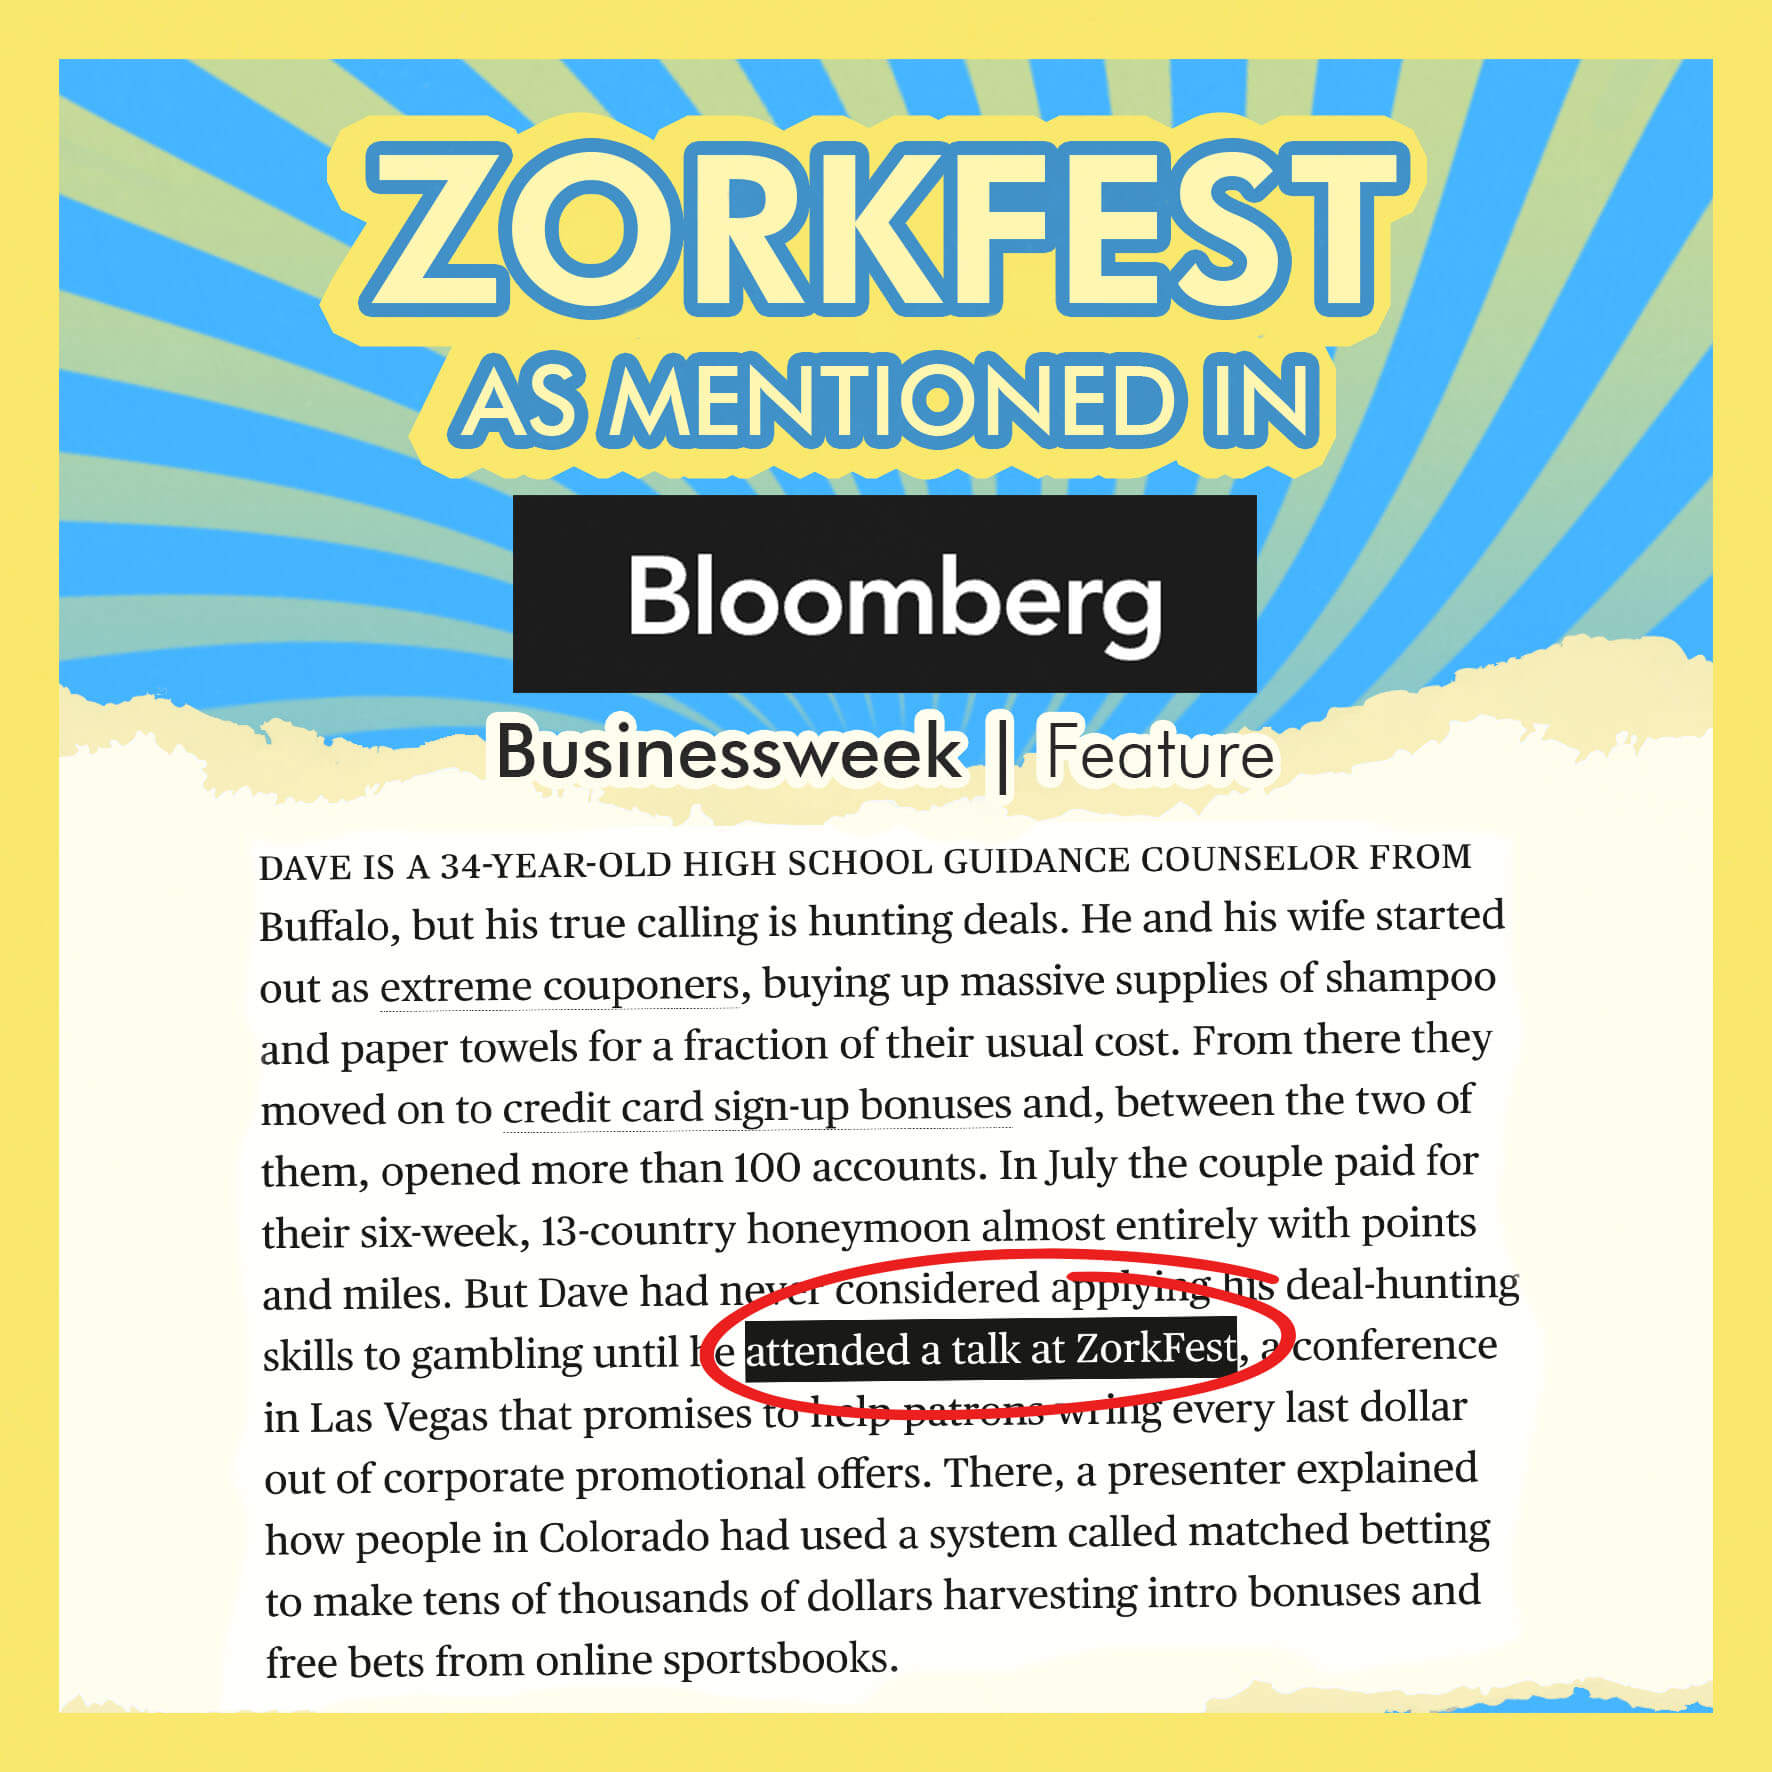 ZorkFest as mentioned in Bloomberg Businessweek Feature